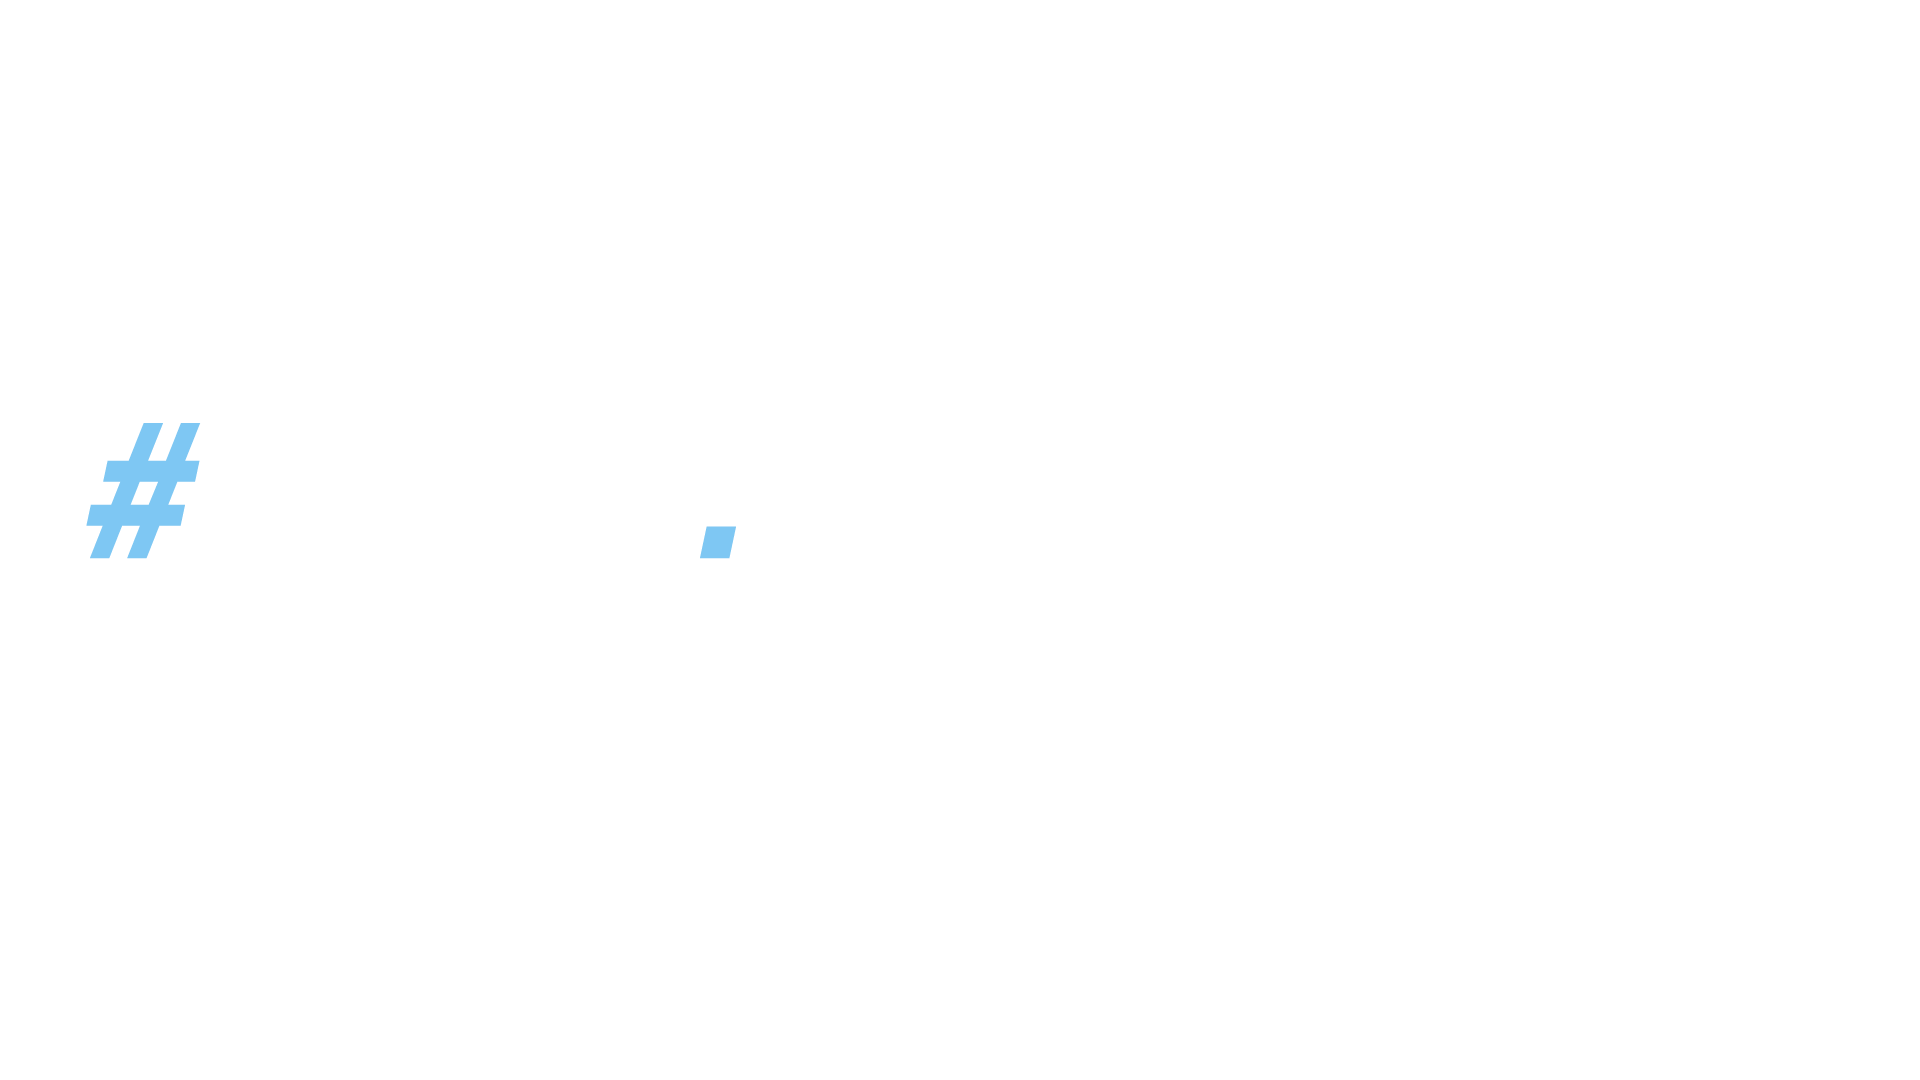 teampeppermint